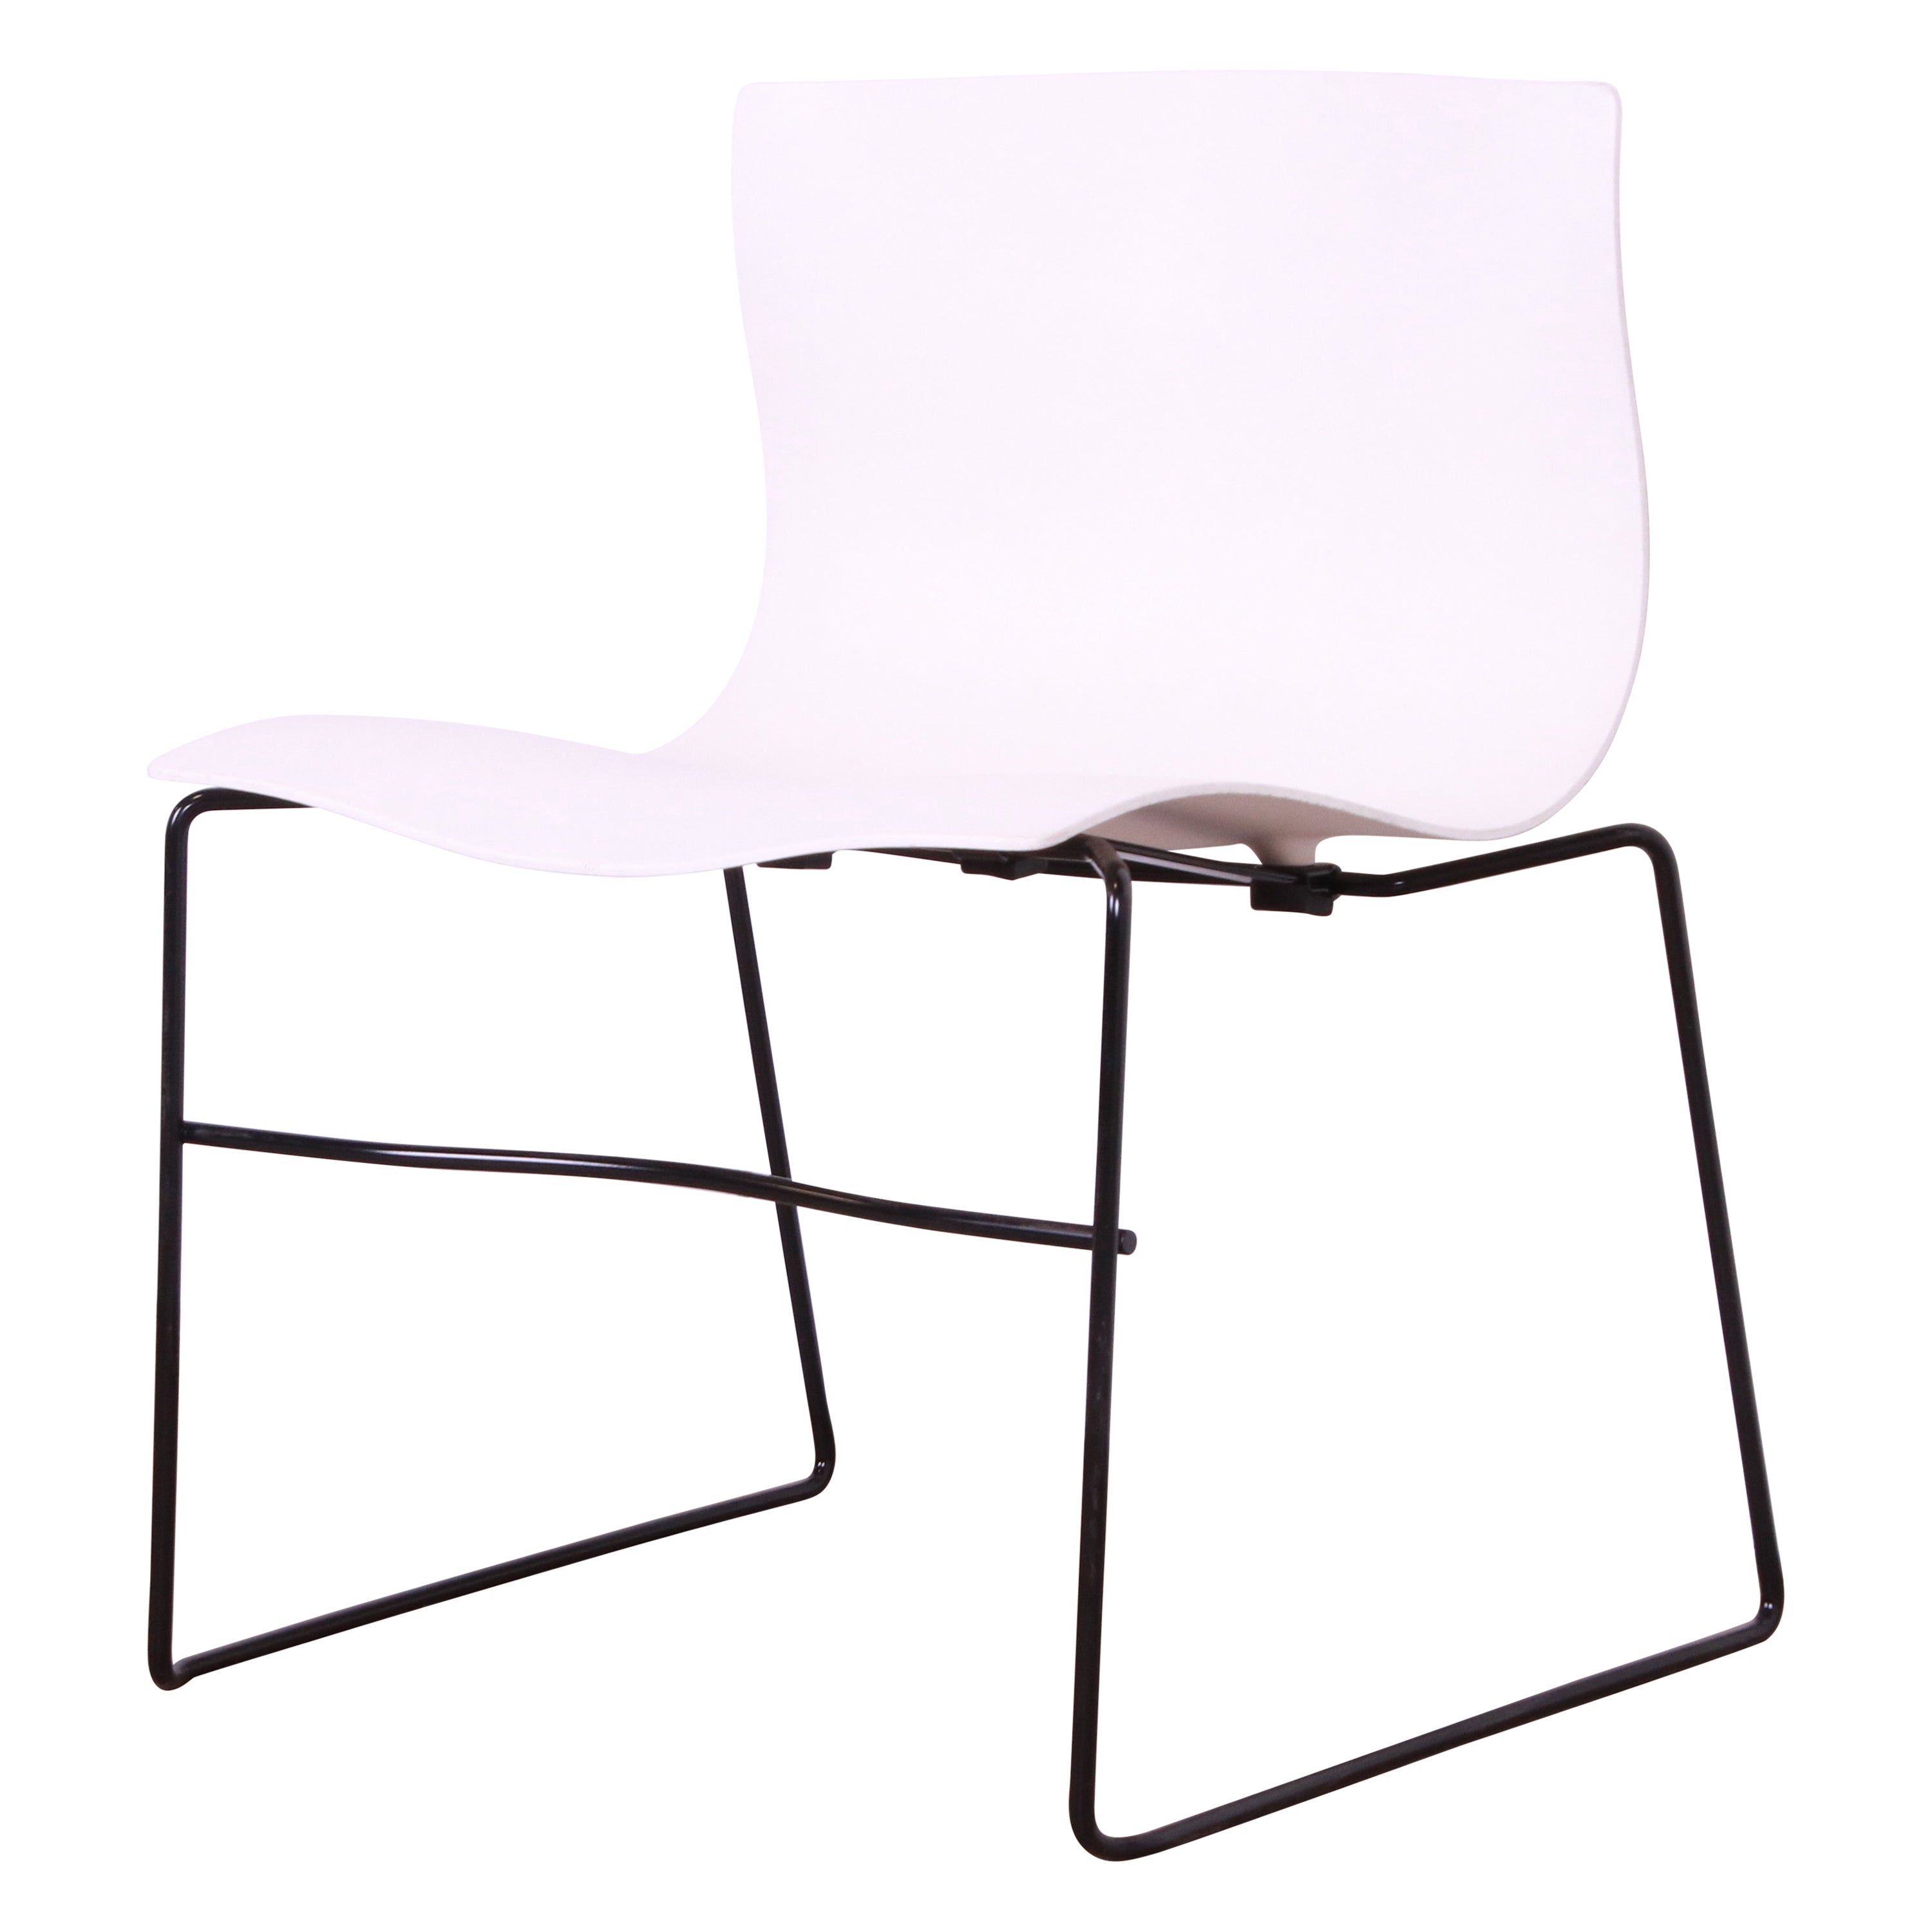 Massimo Vignelli for Knoll Postmodern Handkerchief Chair, 7 Available